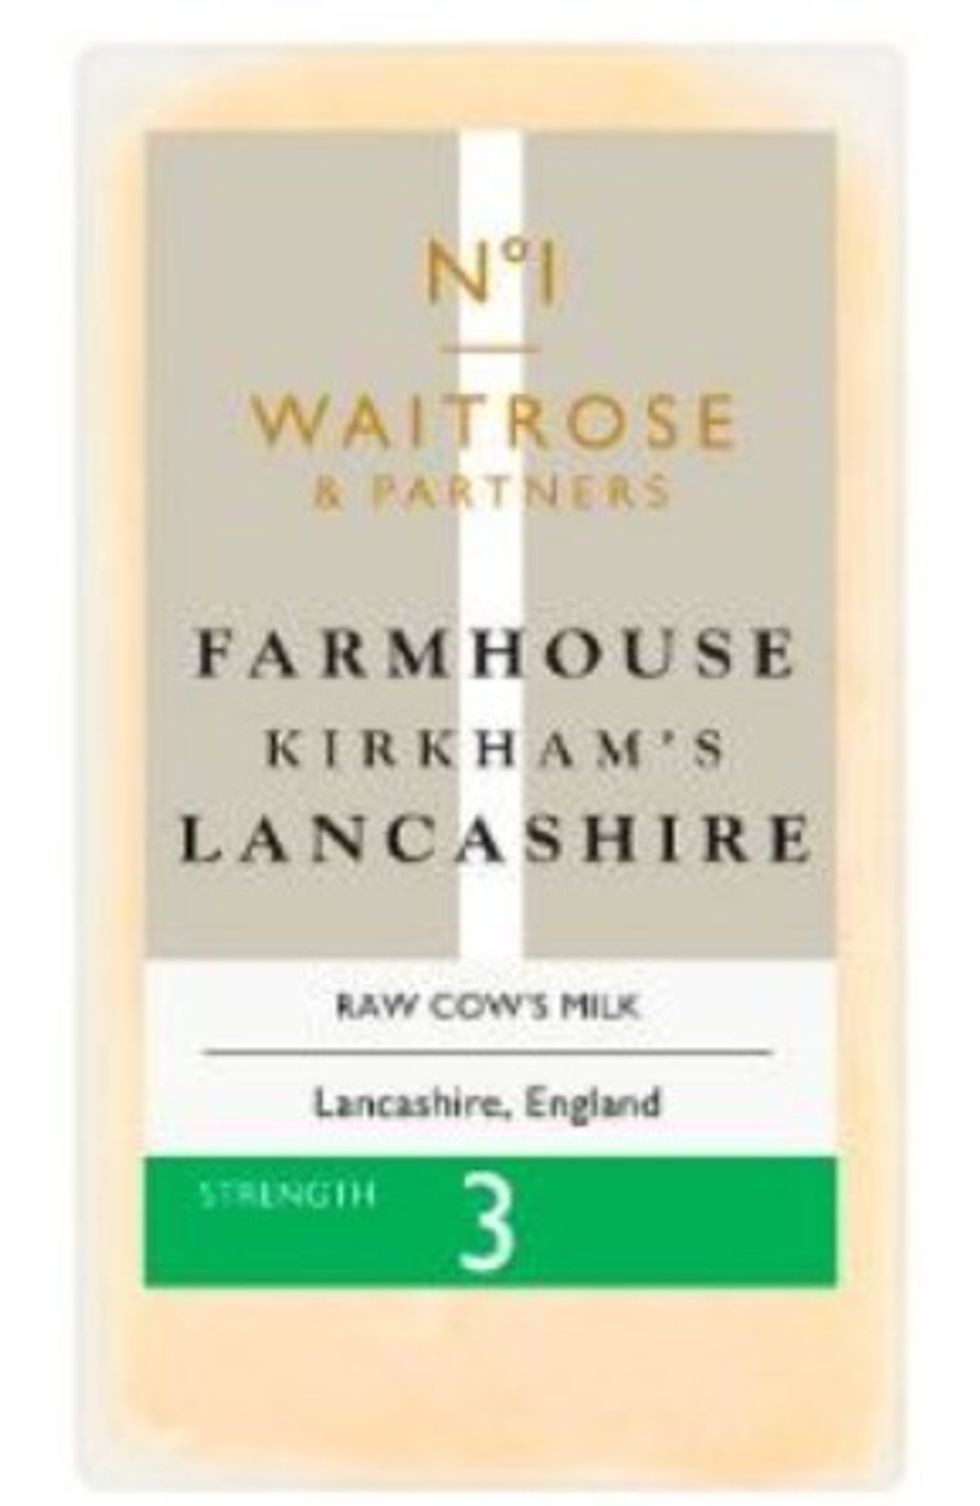 Urgent recall Waitrose shoppers warned of cheese that causes vomiting